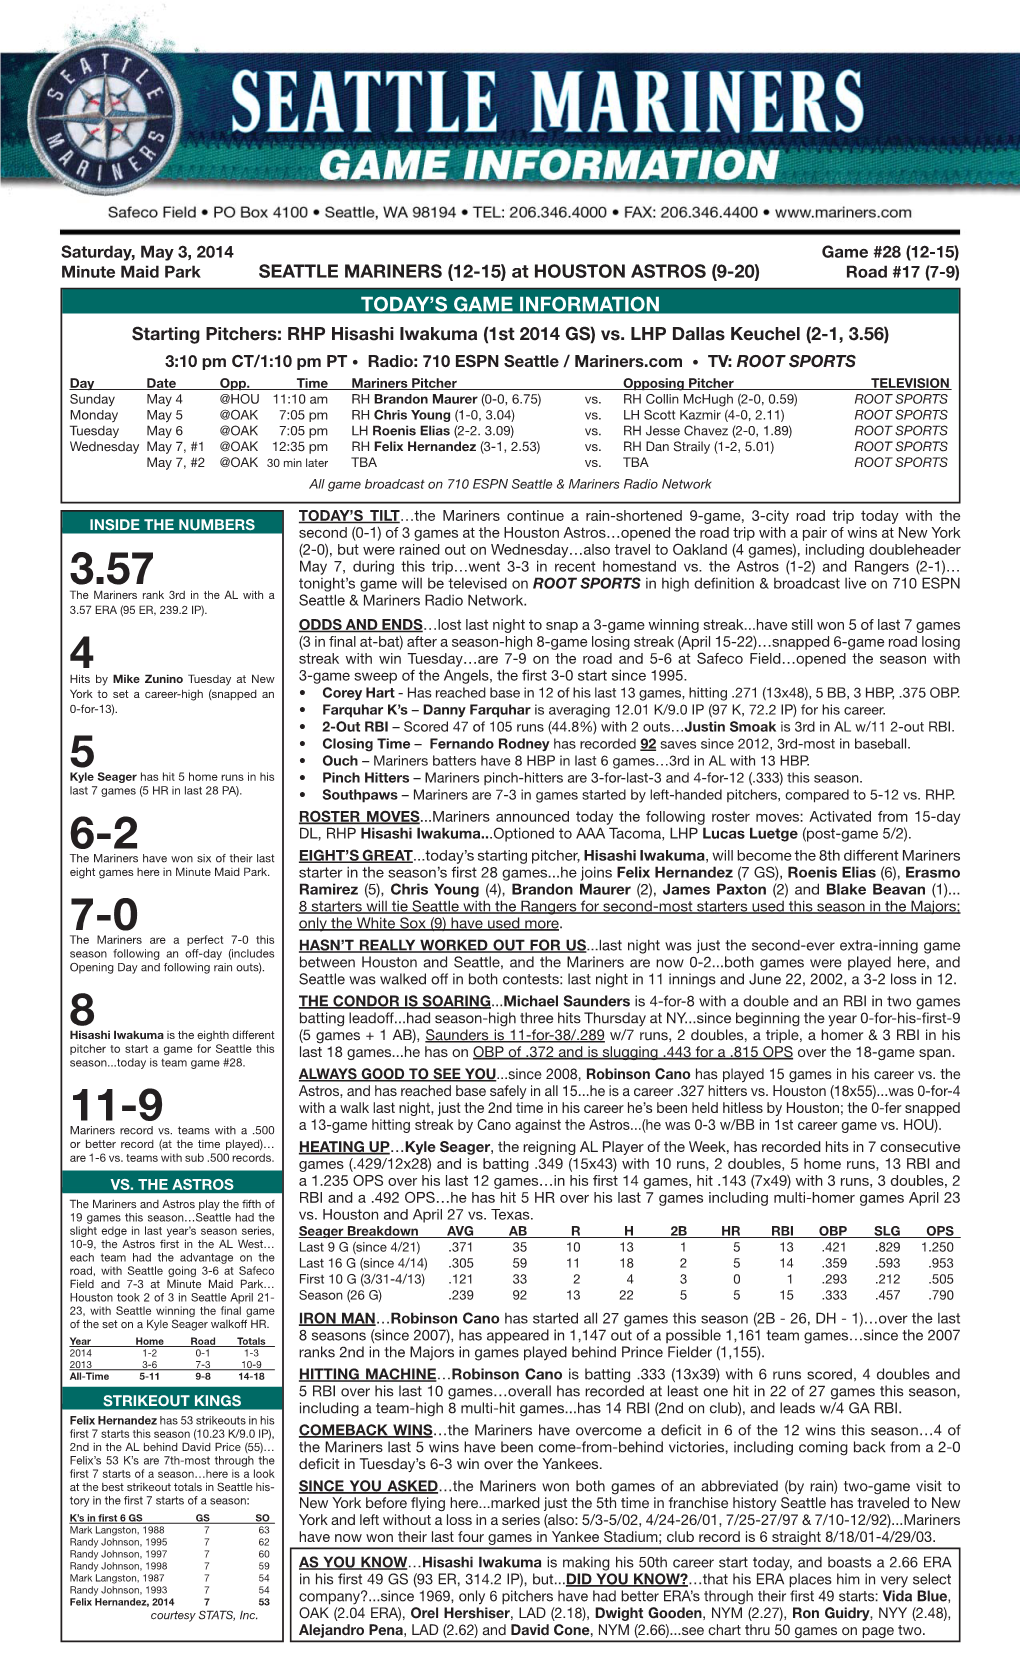 05.03.14 Game Notes.Indd